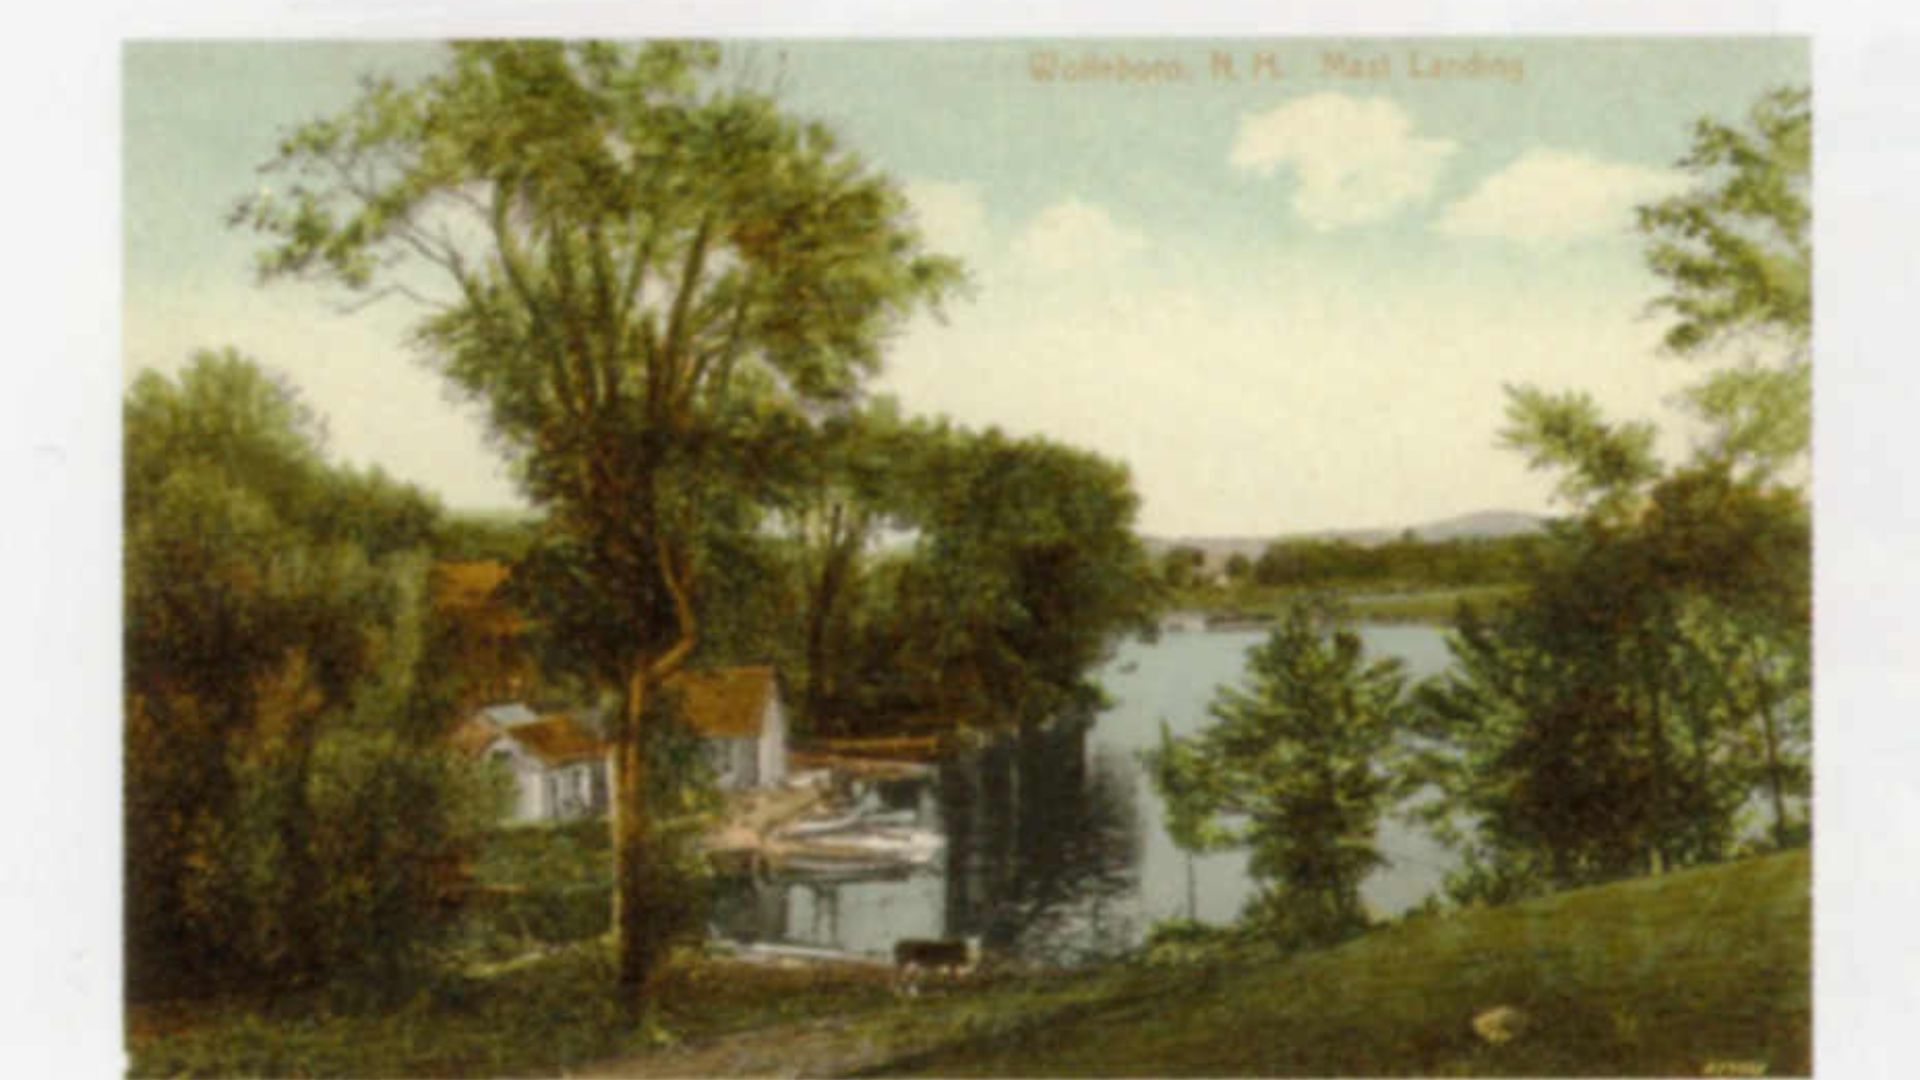 vintage postcard of a lake with trees